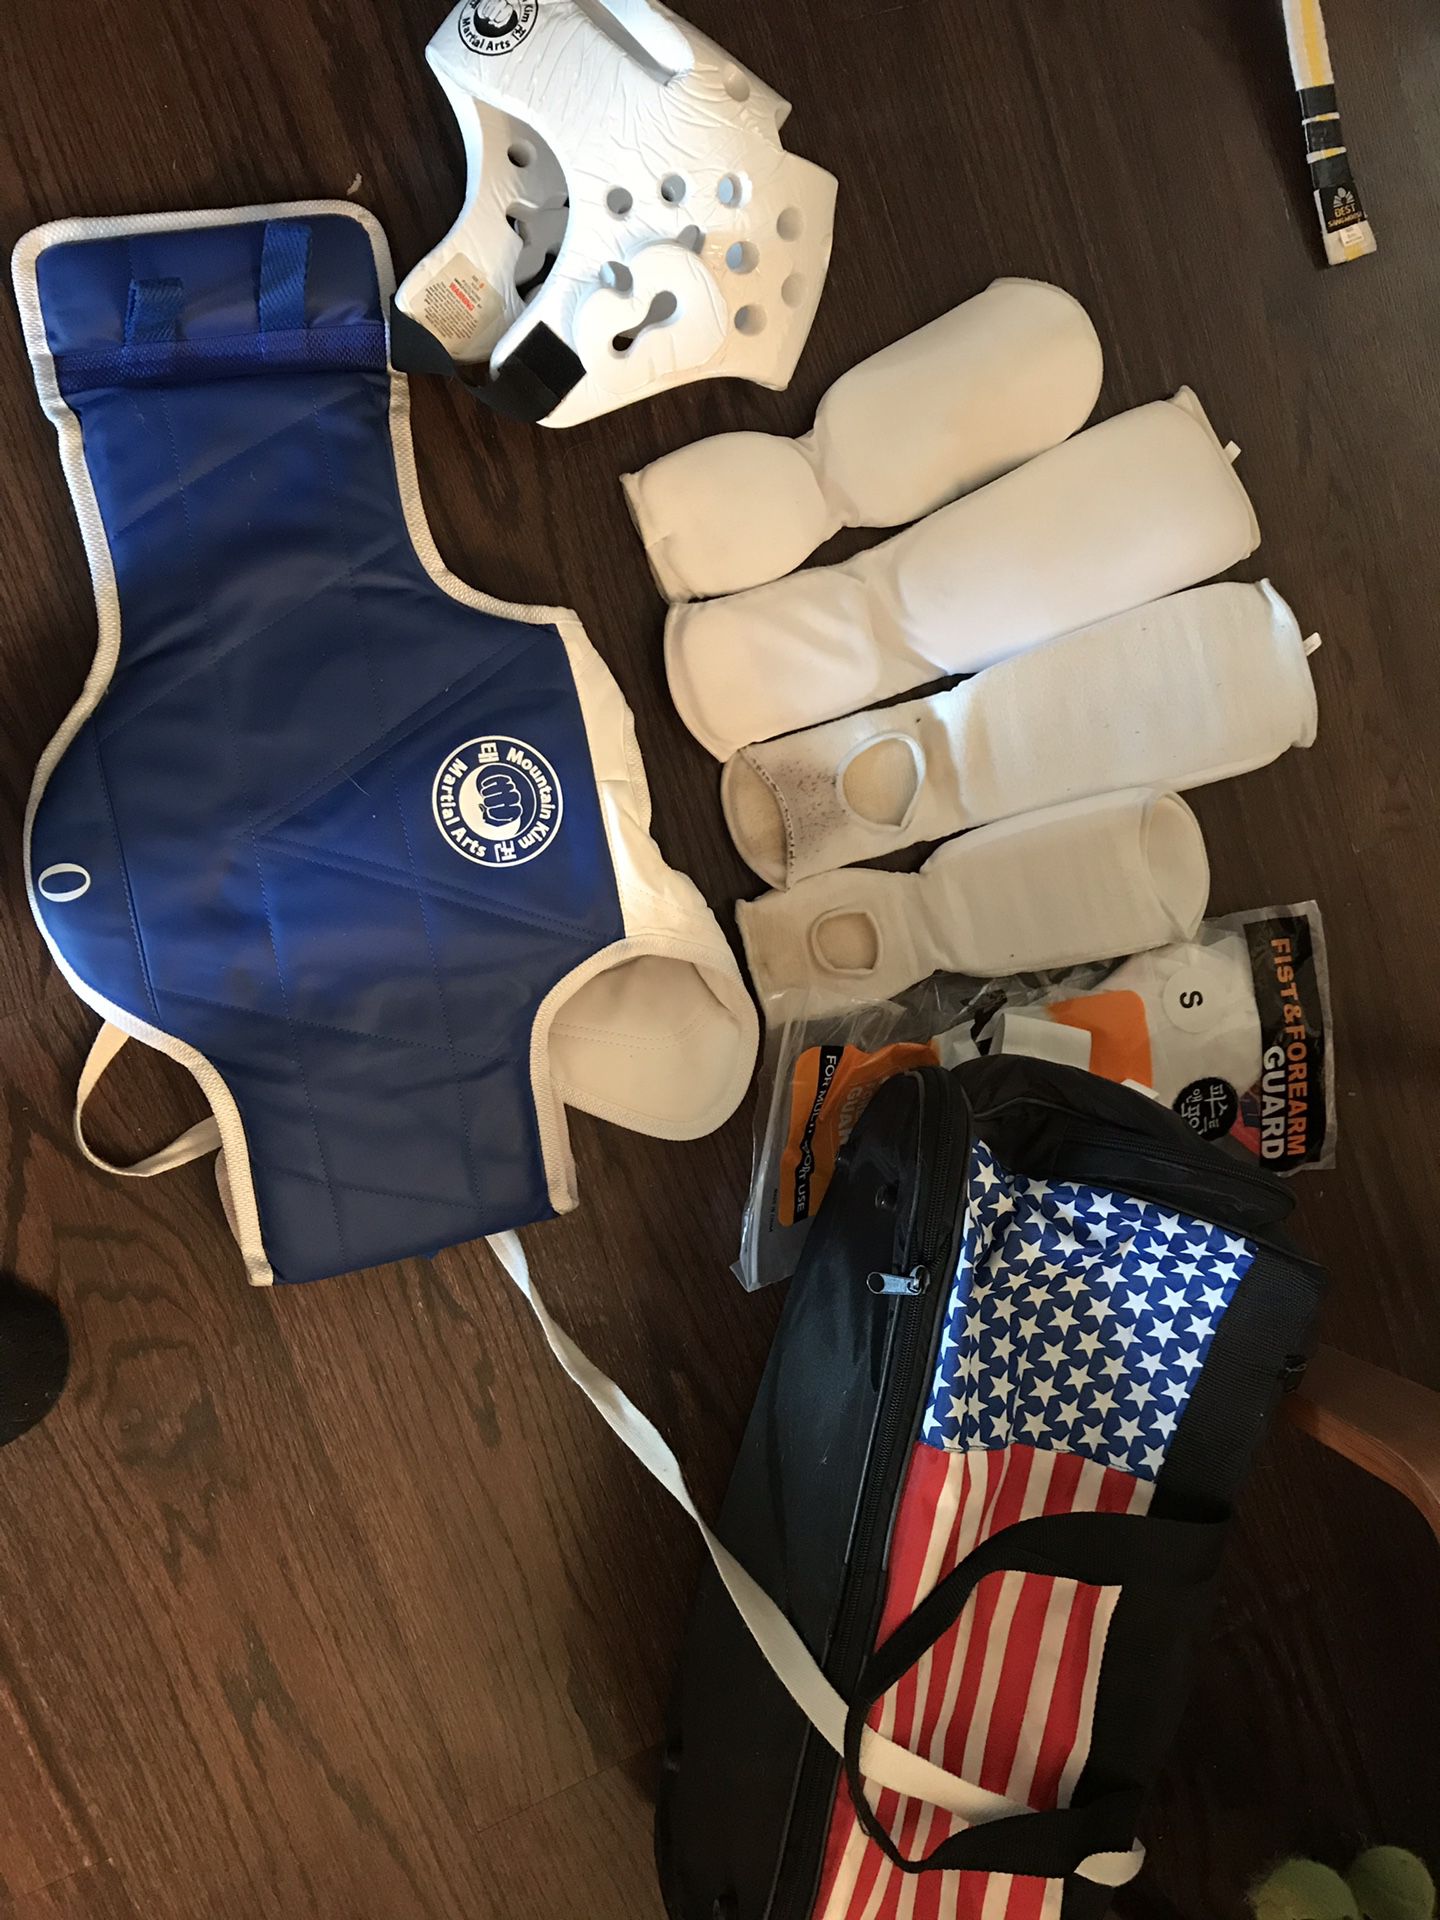 Size S Tae Kwon Do sparring gear kids